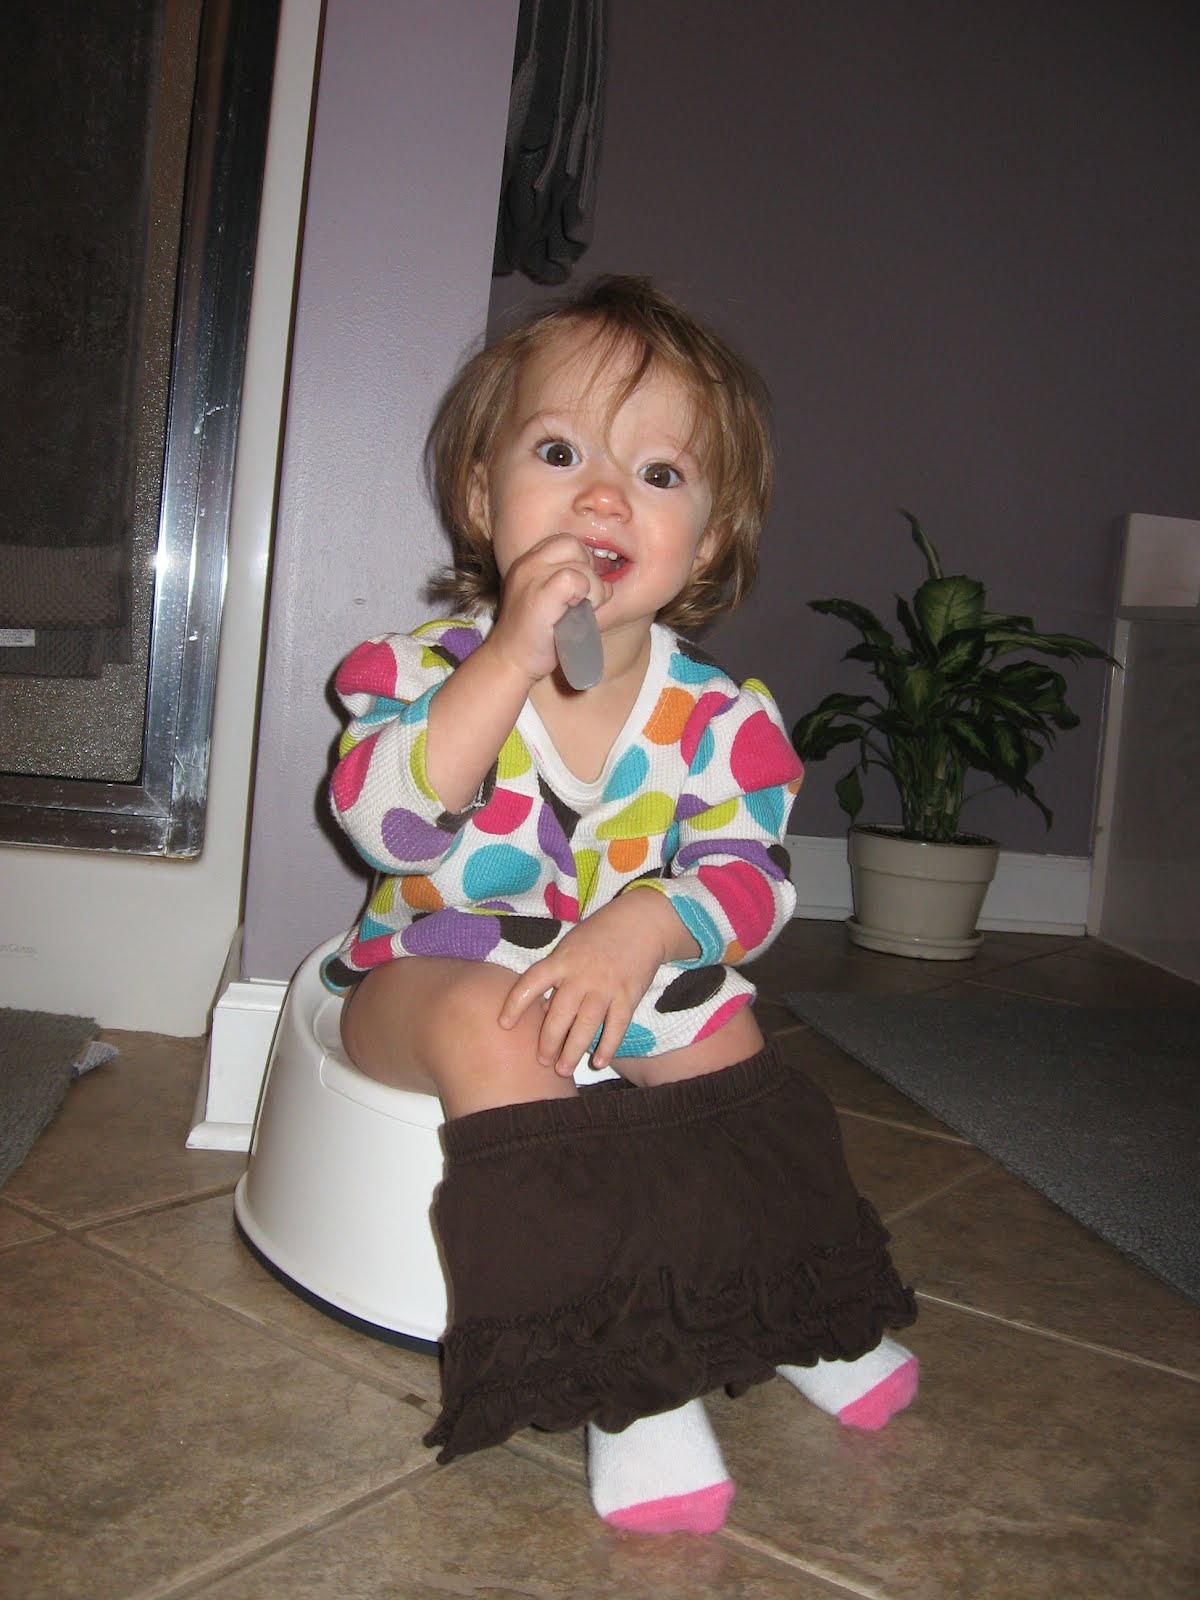  darling. Sitting on the potty and brushing her teeth. What a big girl